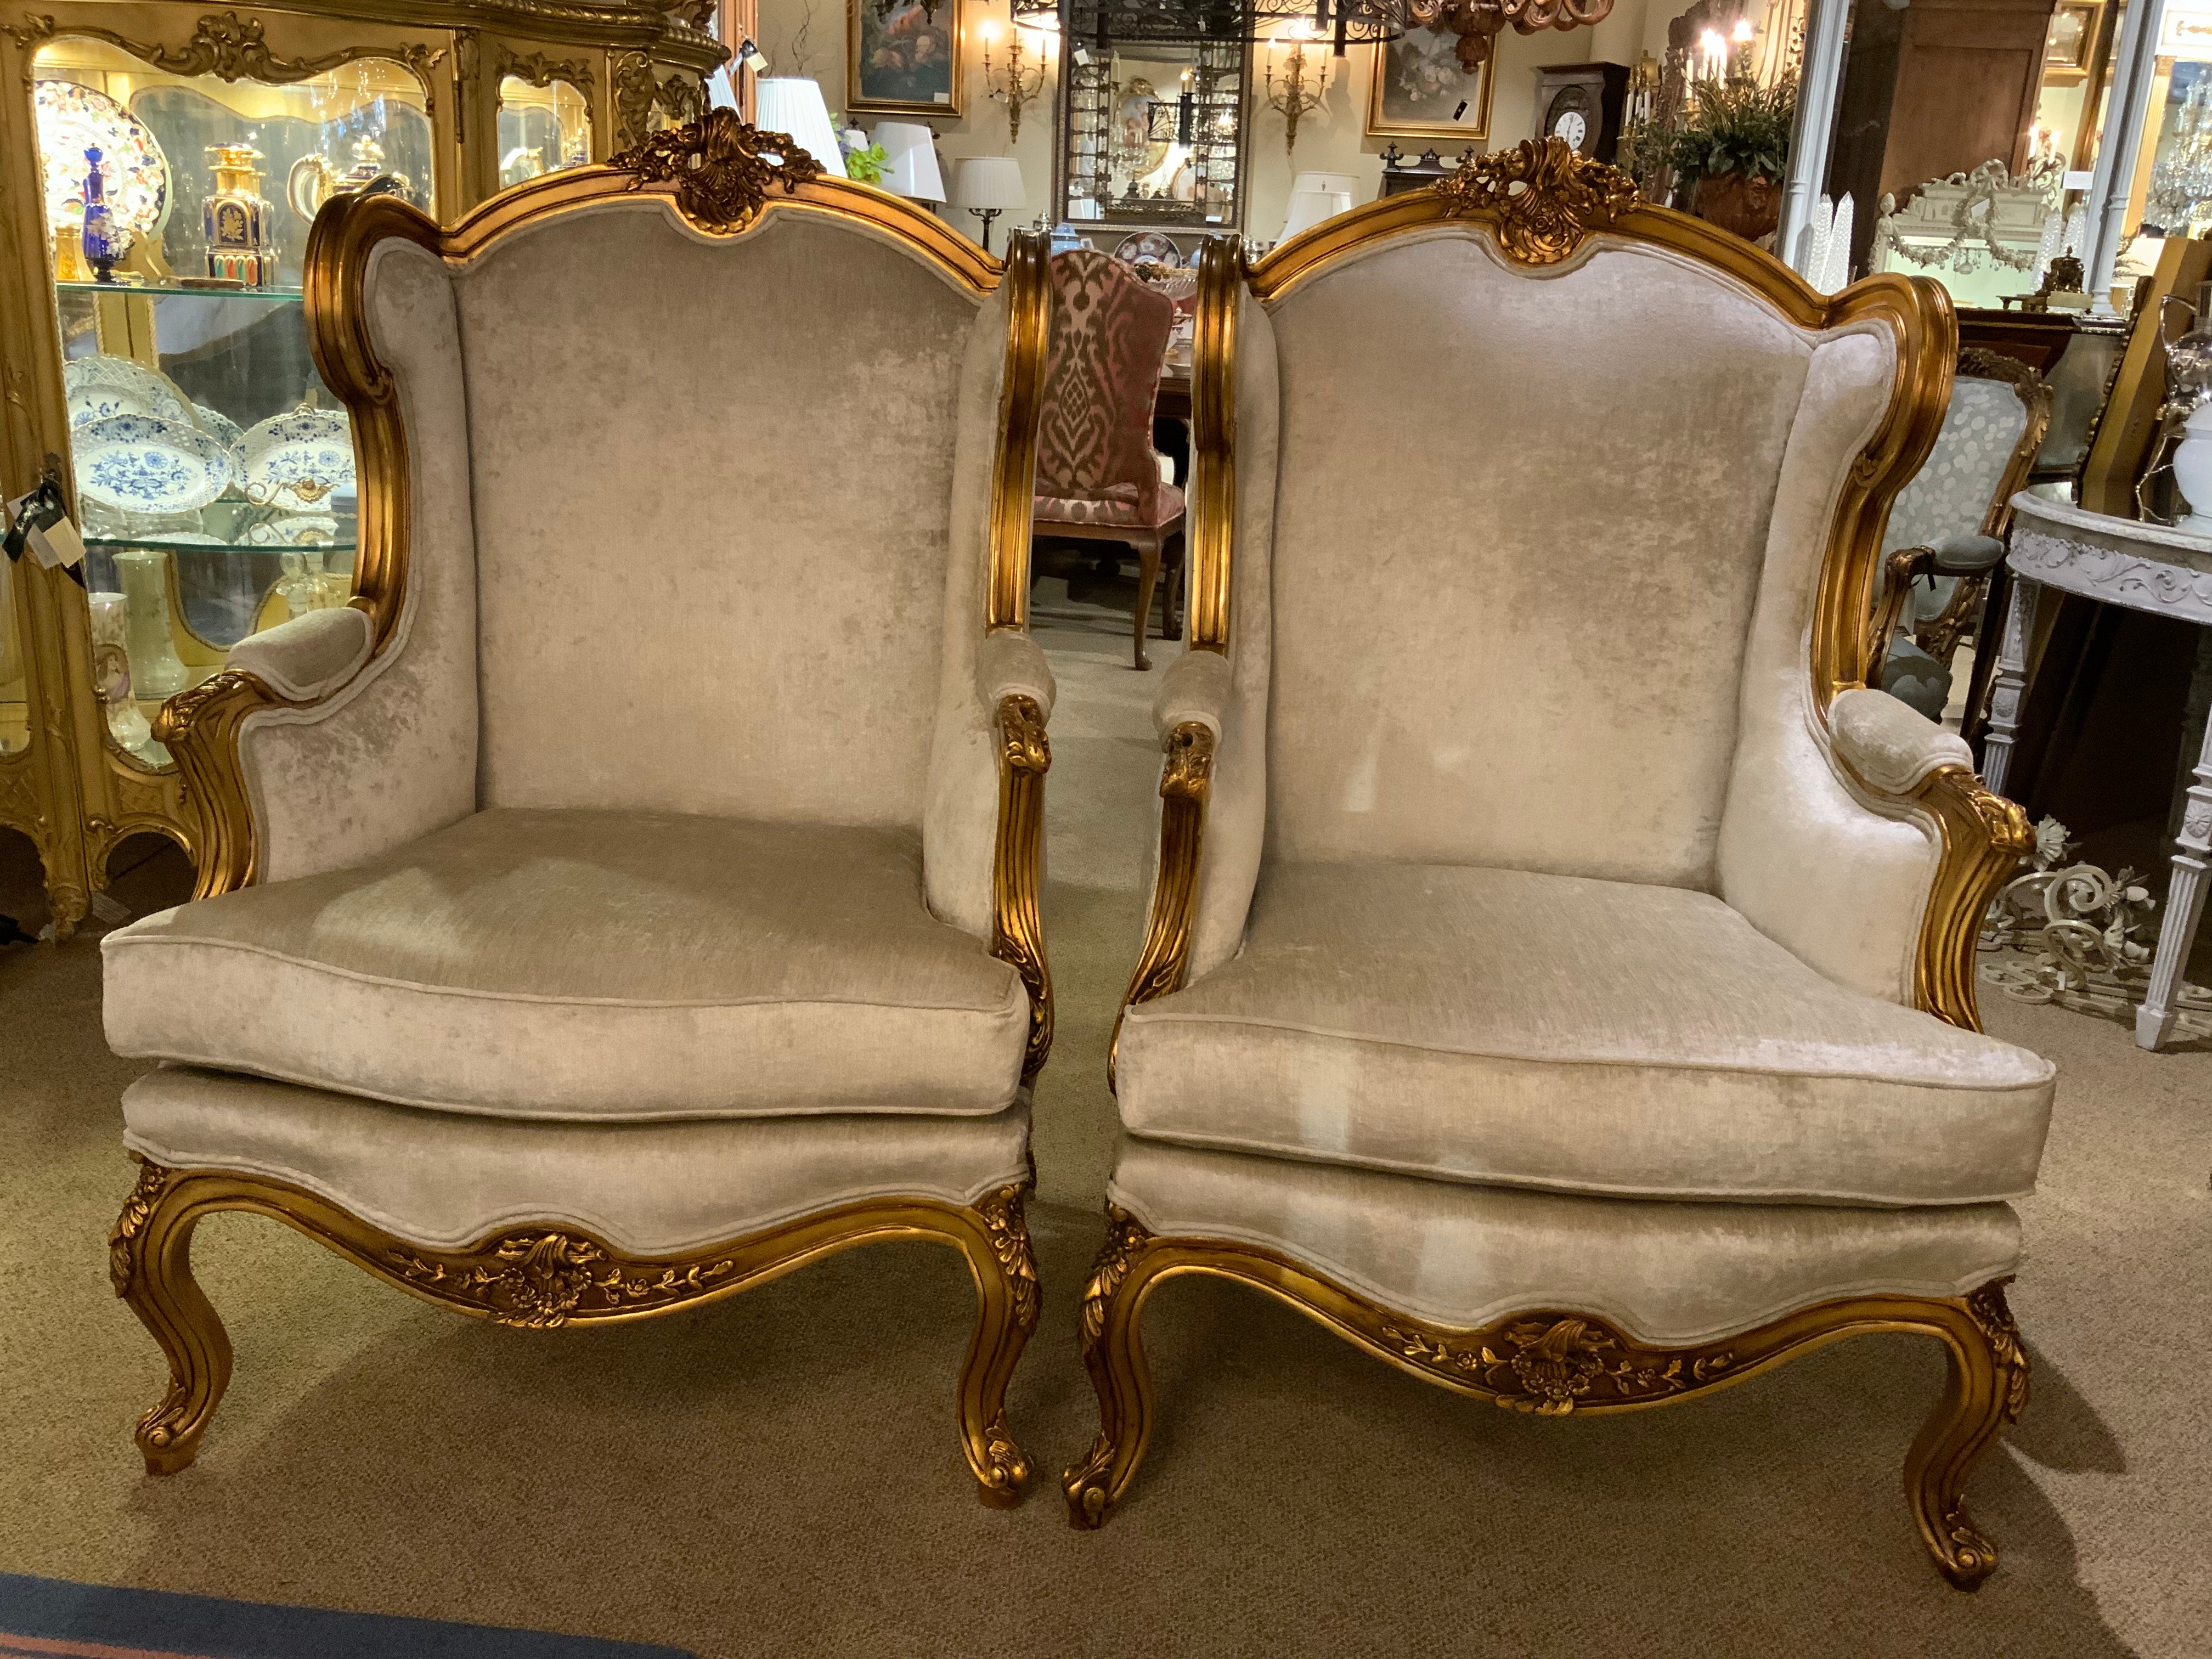 Pair of Louis XV-Style giltwood chairs with a creamy white new upholstery 
The carving is very well done in great detail exhibiting scrolls and foliate
Design. They are filled with a poly foam cushion that is very comfortable 
The legs are curved